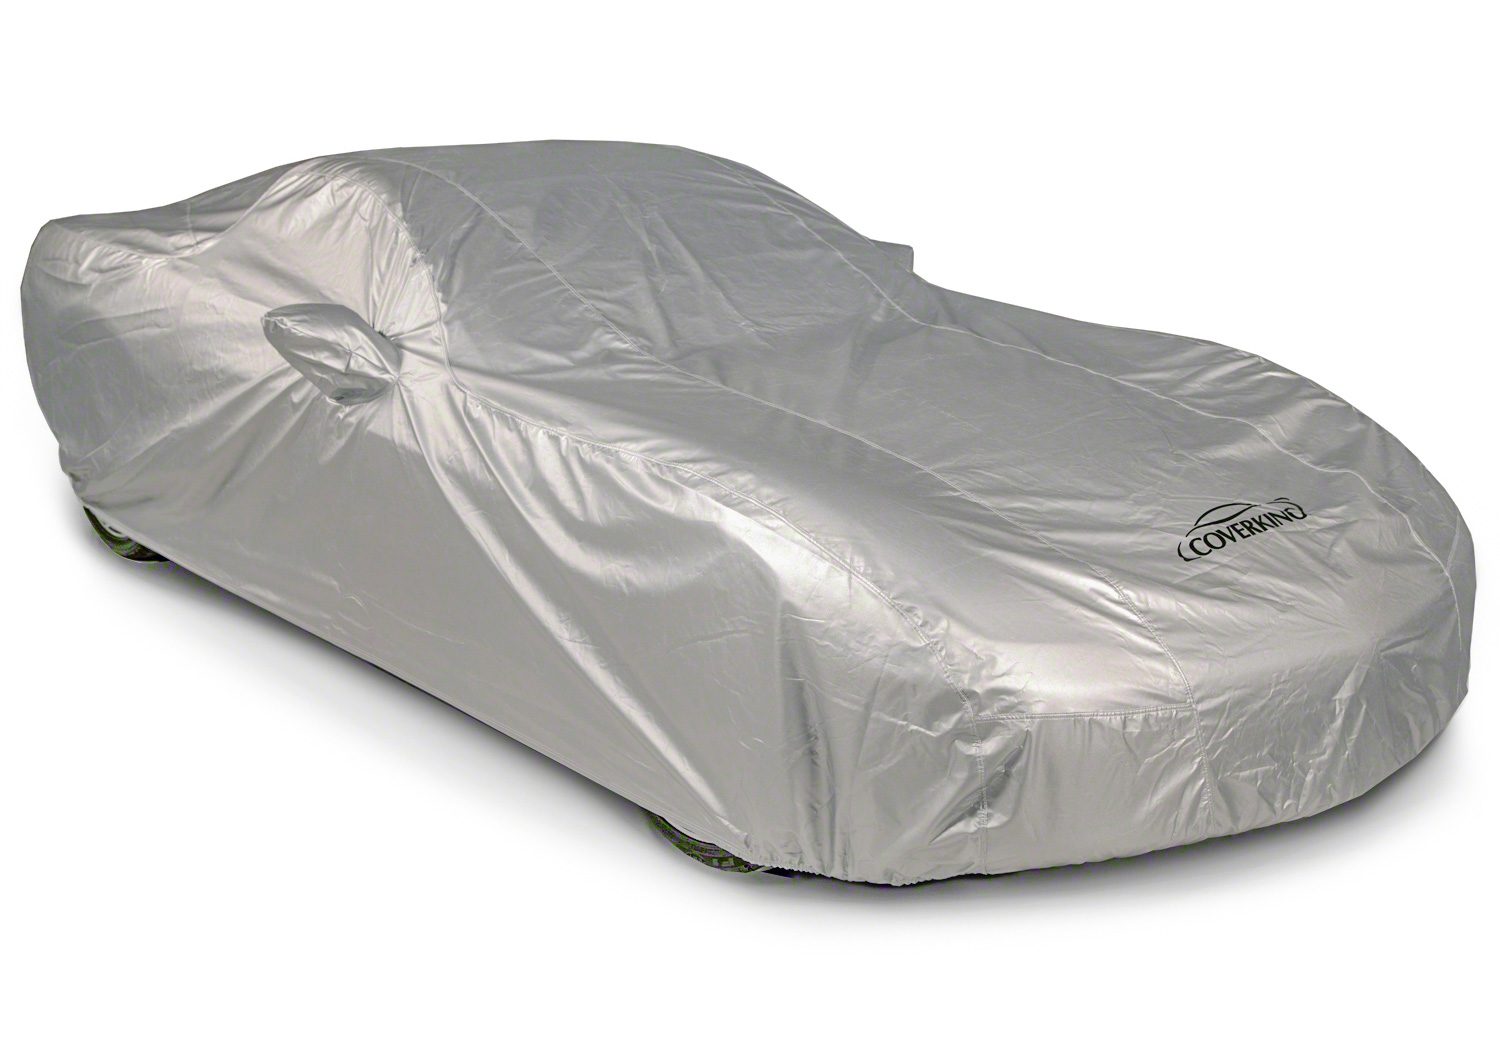 Silverguard Plus Car Cover for 2025 Ford F-150 Lightning 